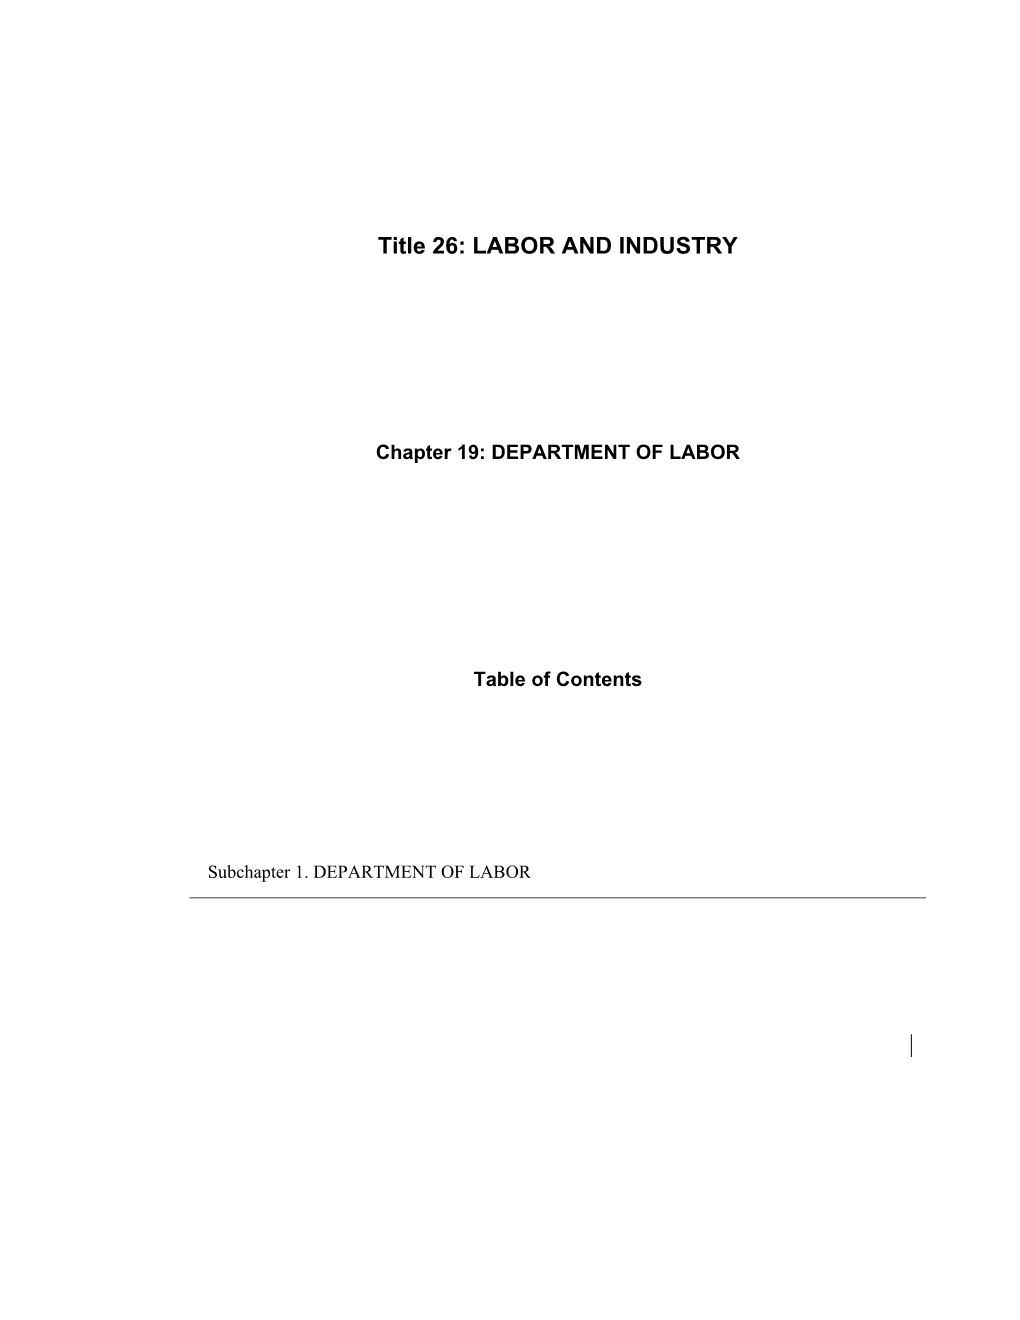 MRS Title 26, Chapter19: DEPARTMENT of LABOR